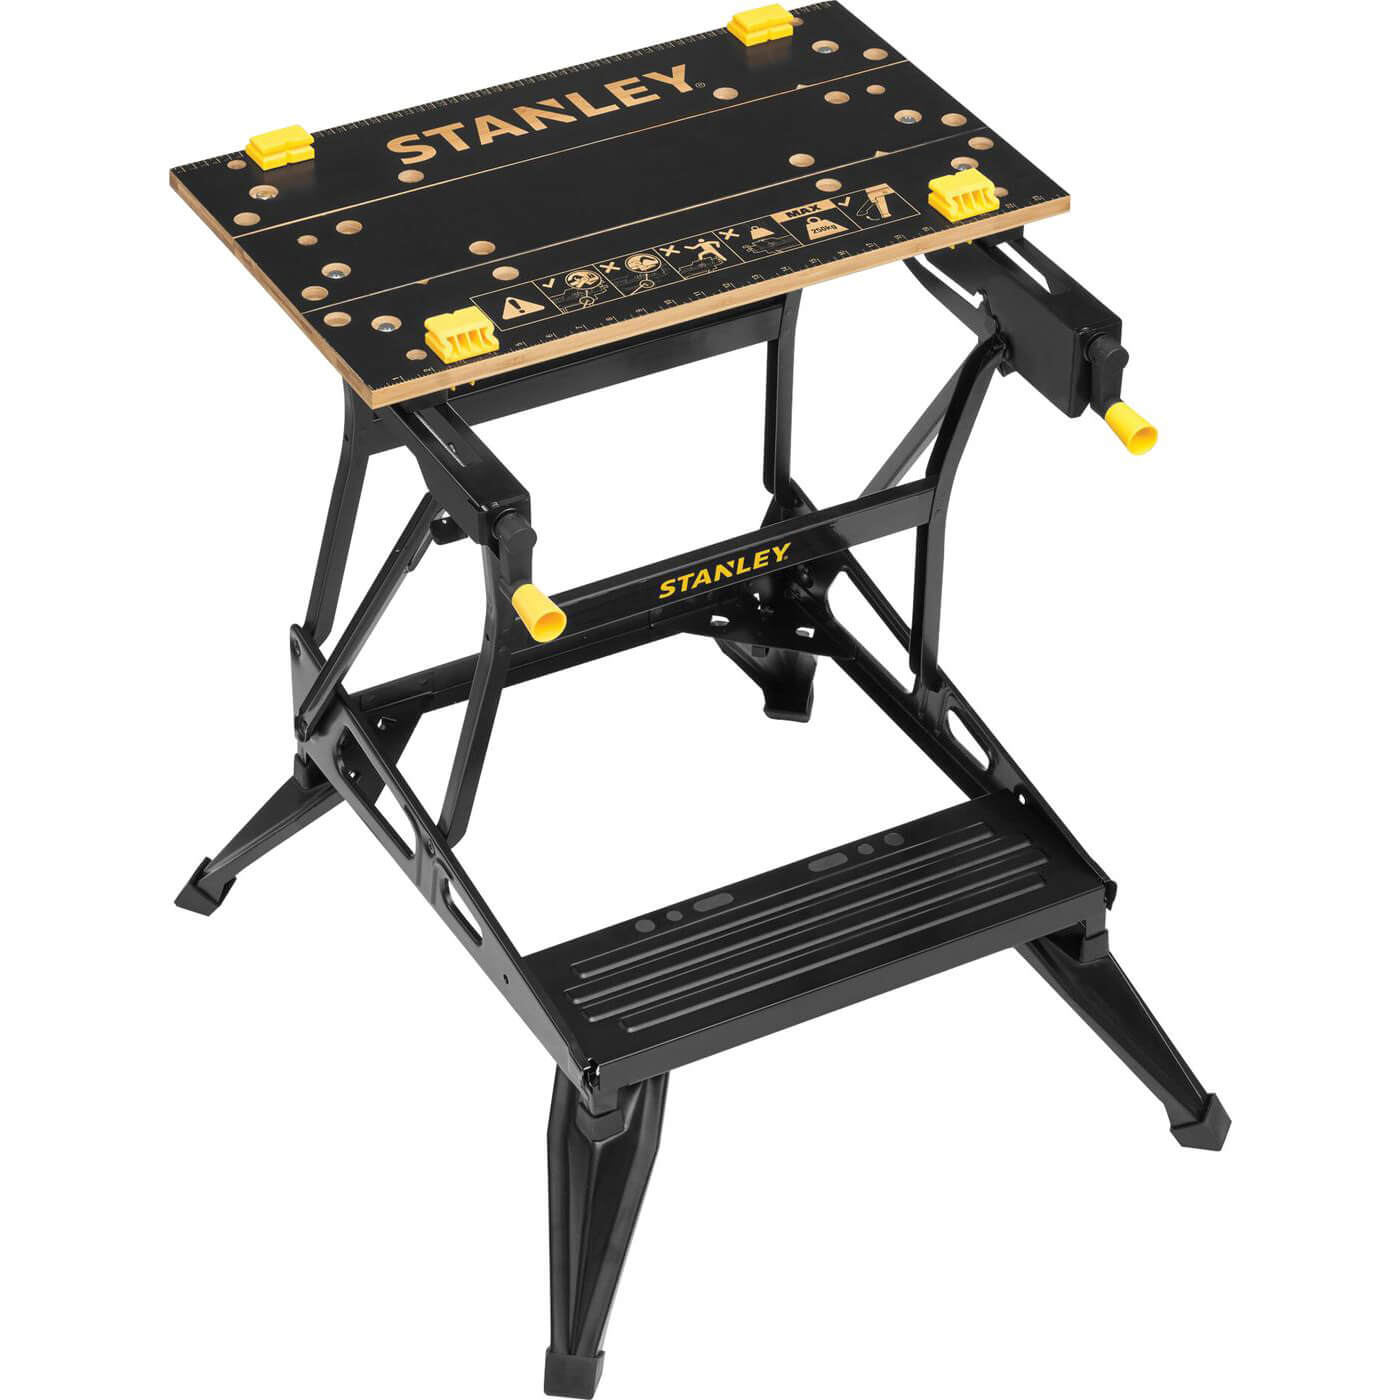 Image of Stanley 2 in 1 Workbench and Vice